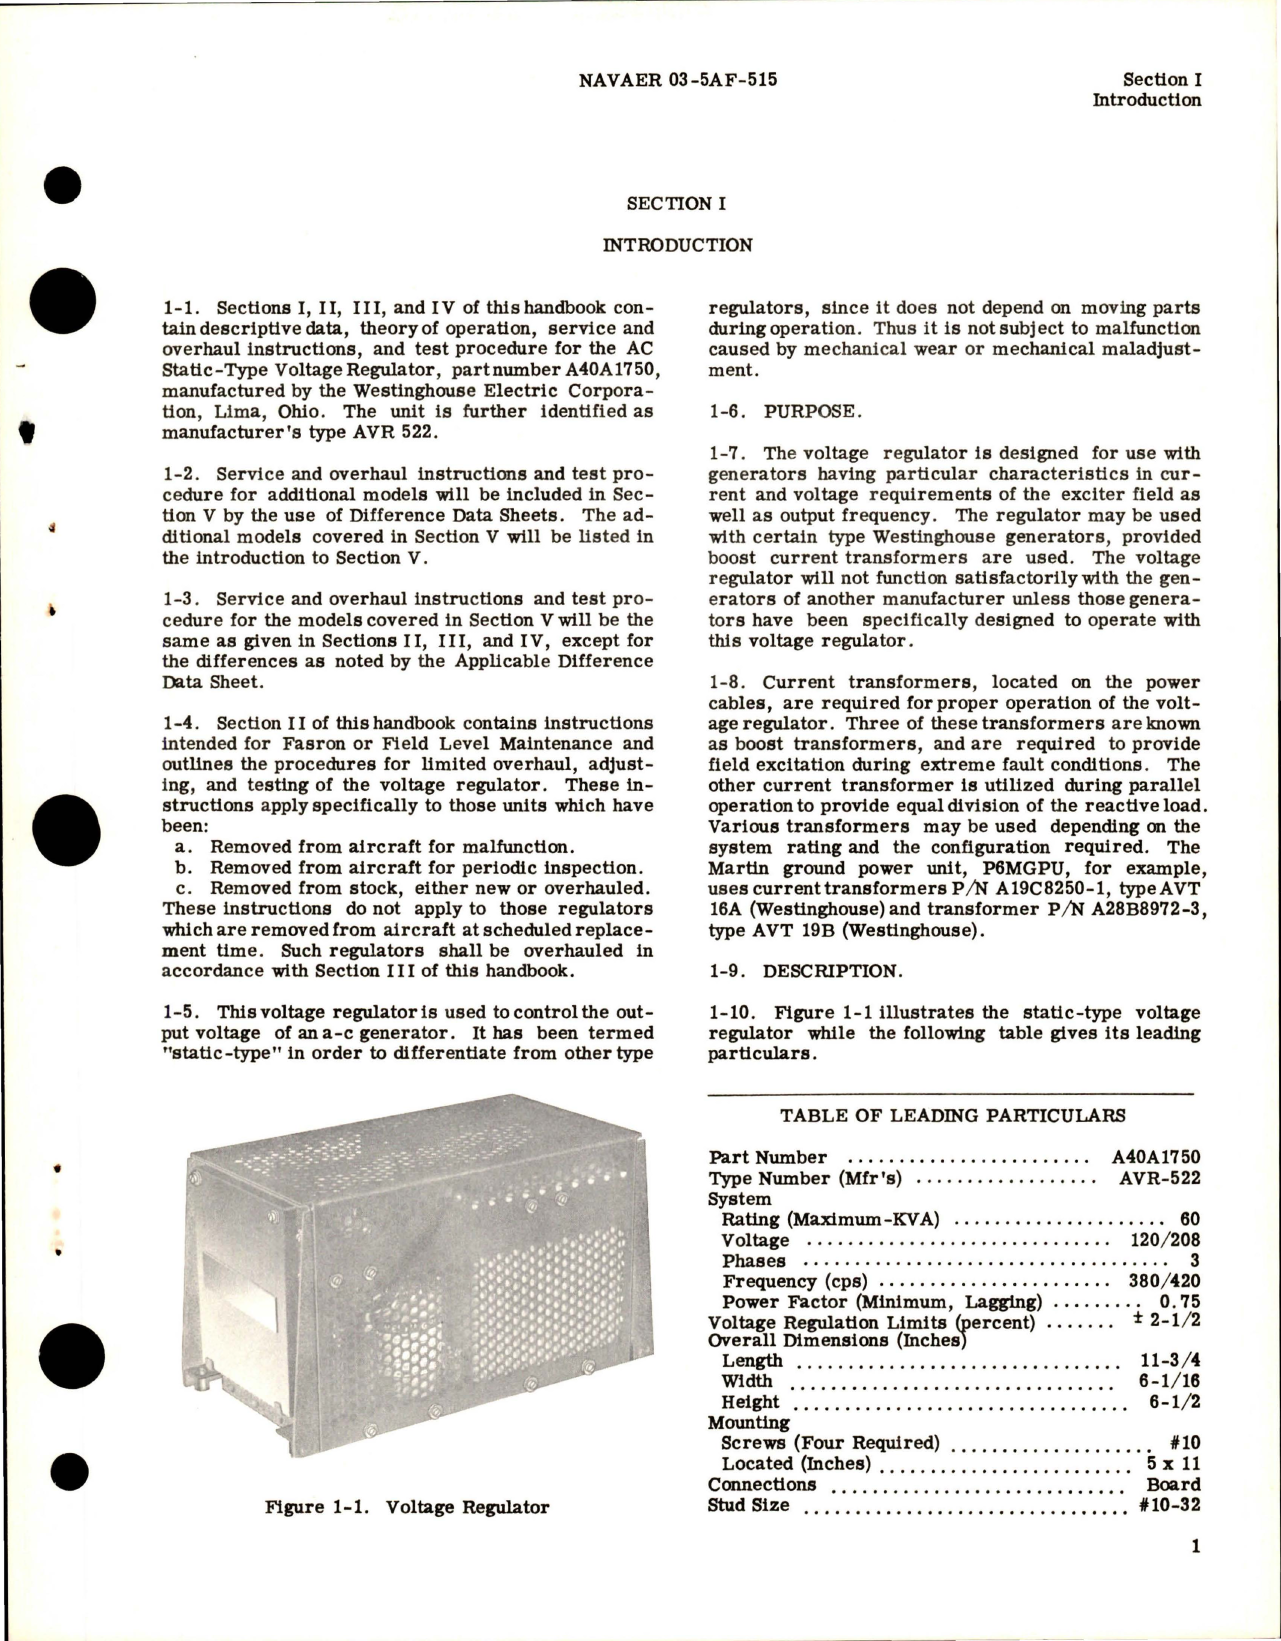 Sample page 5 from AirCorps Library document: Operation, Service and Overhaul Instructions for Voltage Regulator - Static Type - Part A40A1750